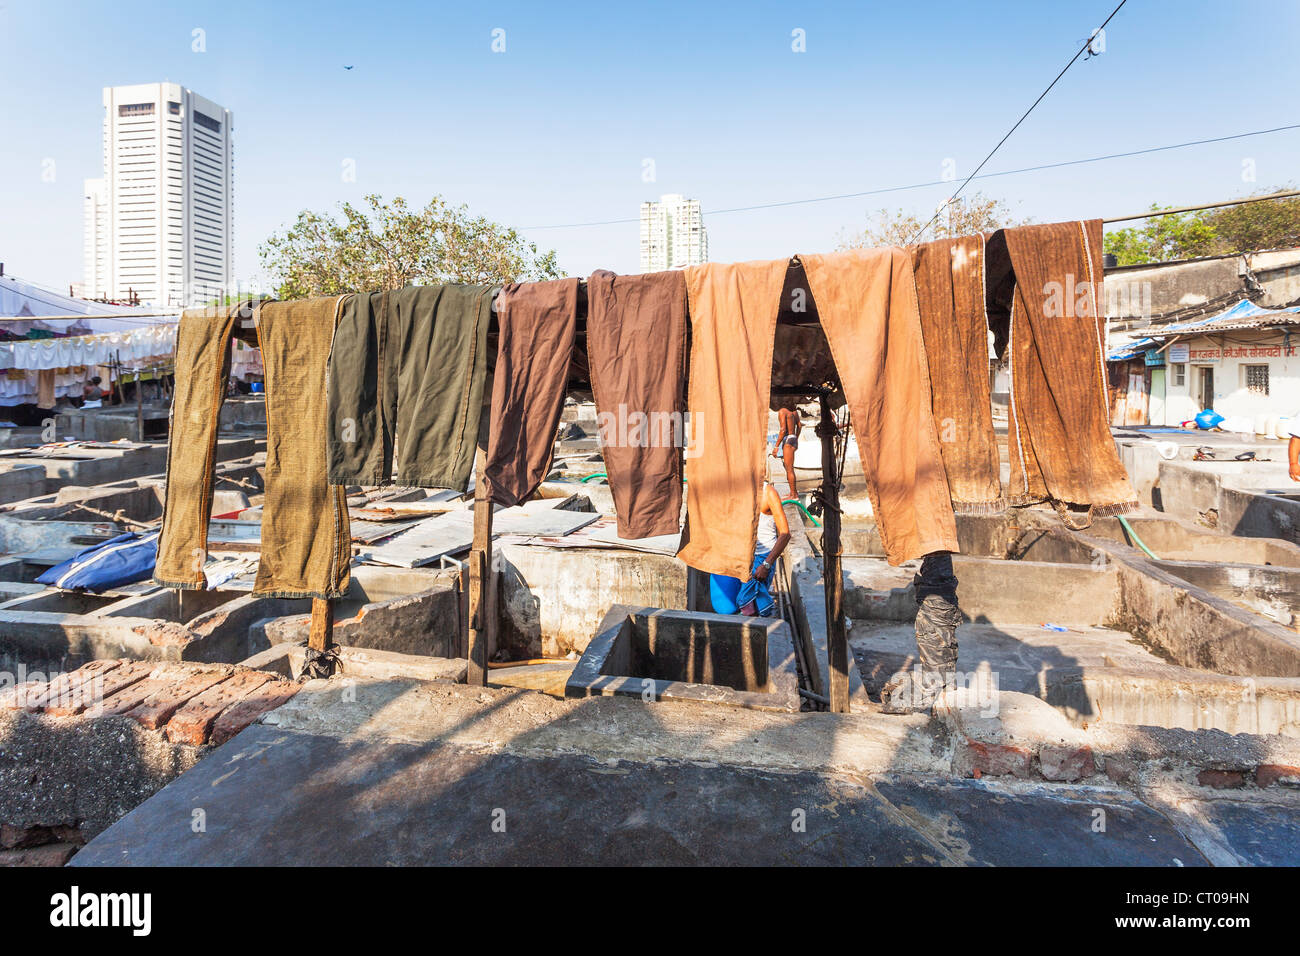 Clothes hanging out to dry in the sun at the open-air laundry, Dhobi Ghat, Mumbai, India Stock Photo